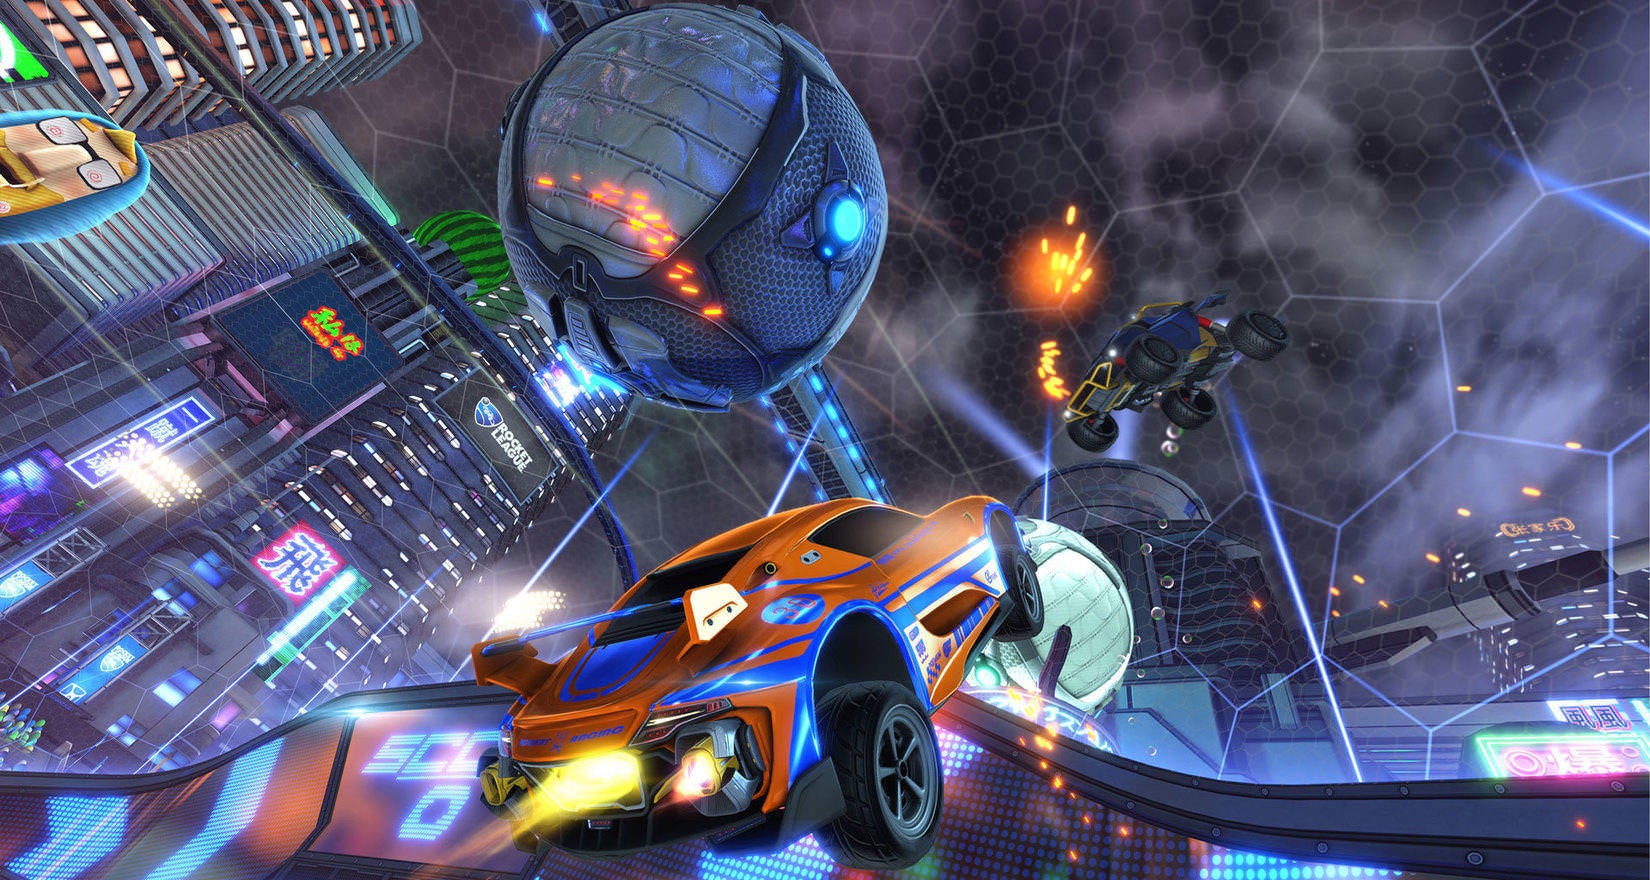 Image for Rocket League ditching Mac and Linux, Stardew Valley sales pass 10 million, and more of the week's PC game news